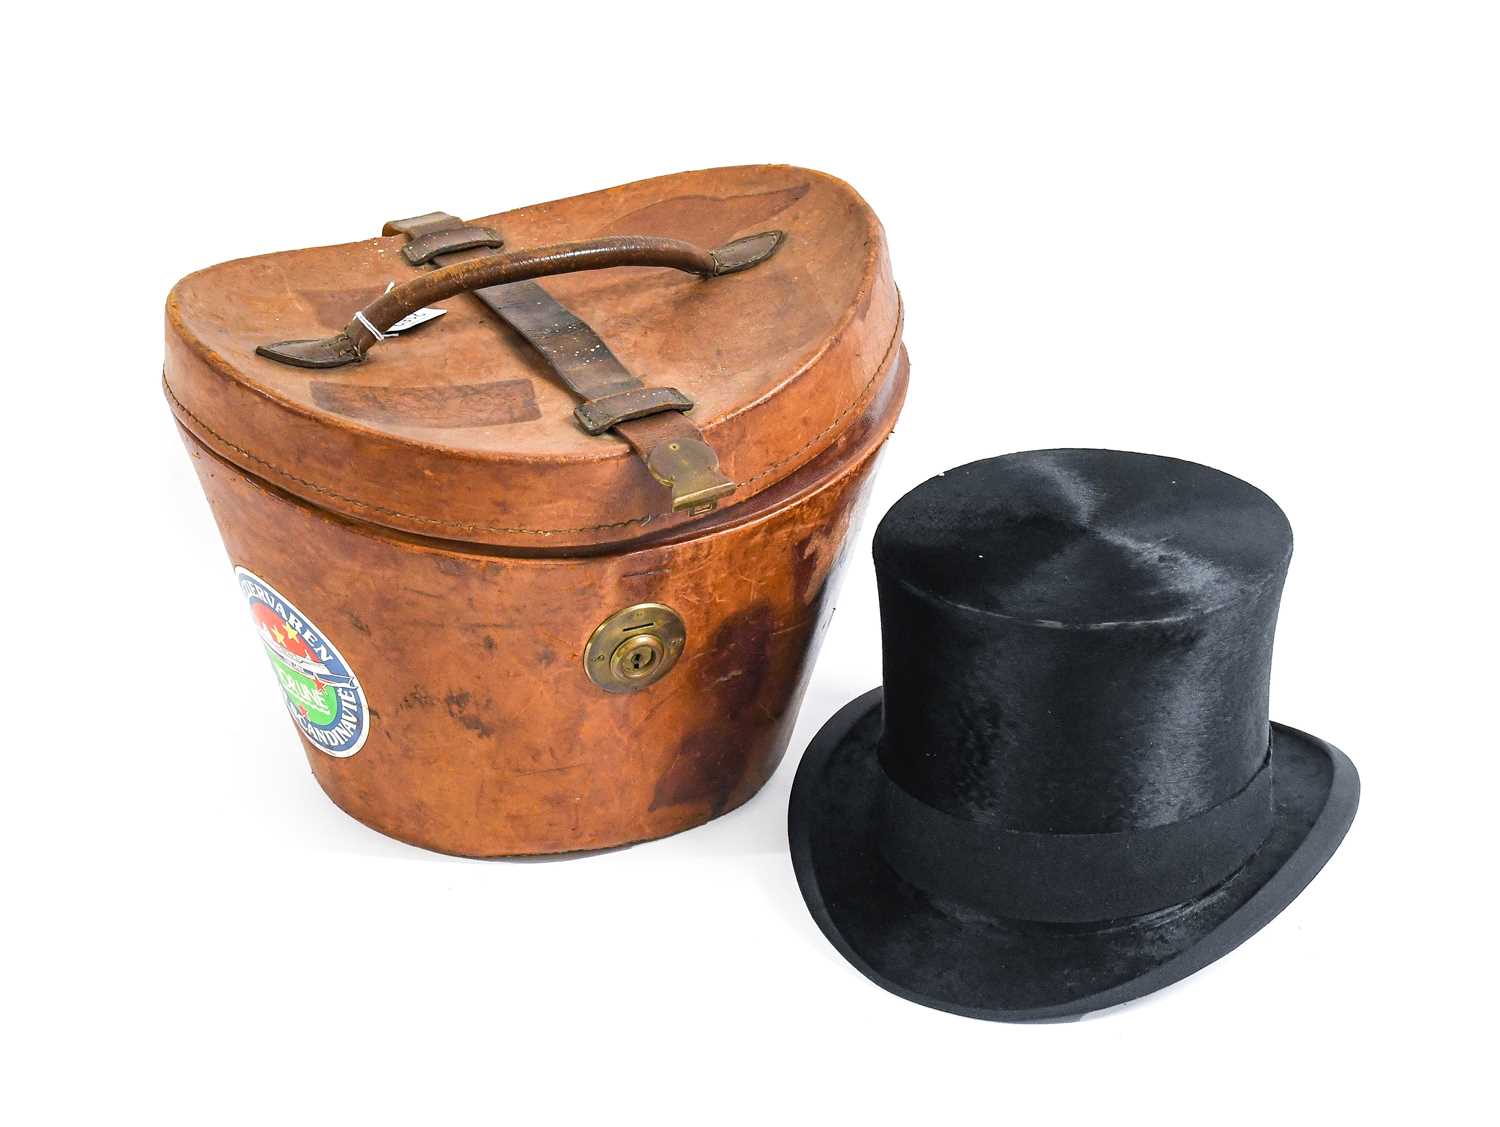 Black Silk Top Hat in Fitted Leather Hat Case with lime green cotton lining 20.5cm by 16.5cm,